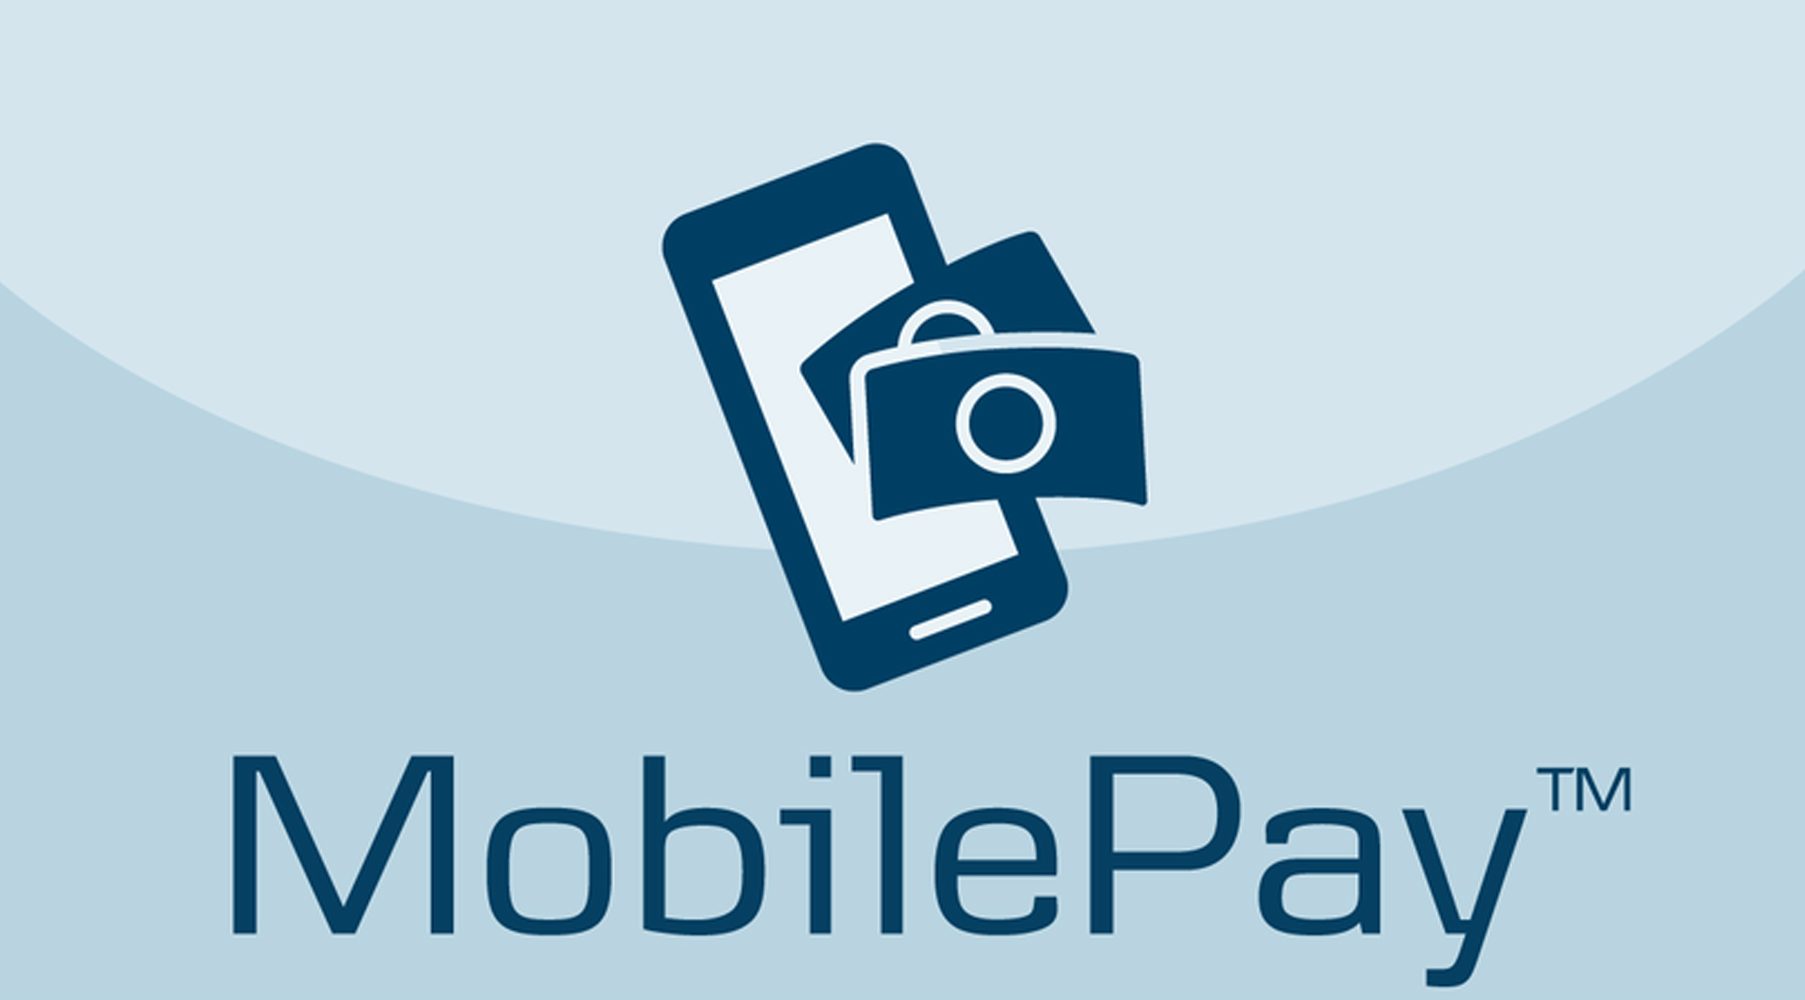 Mobil Pay